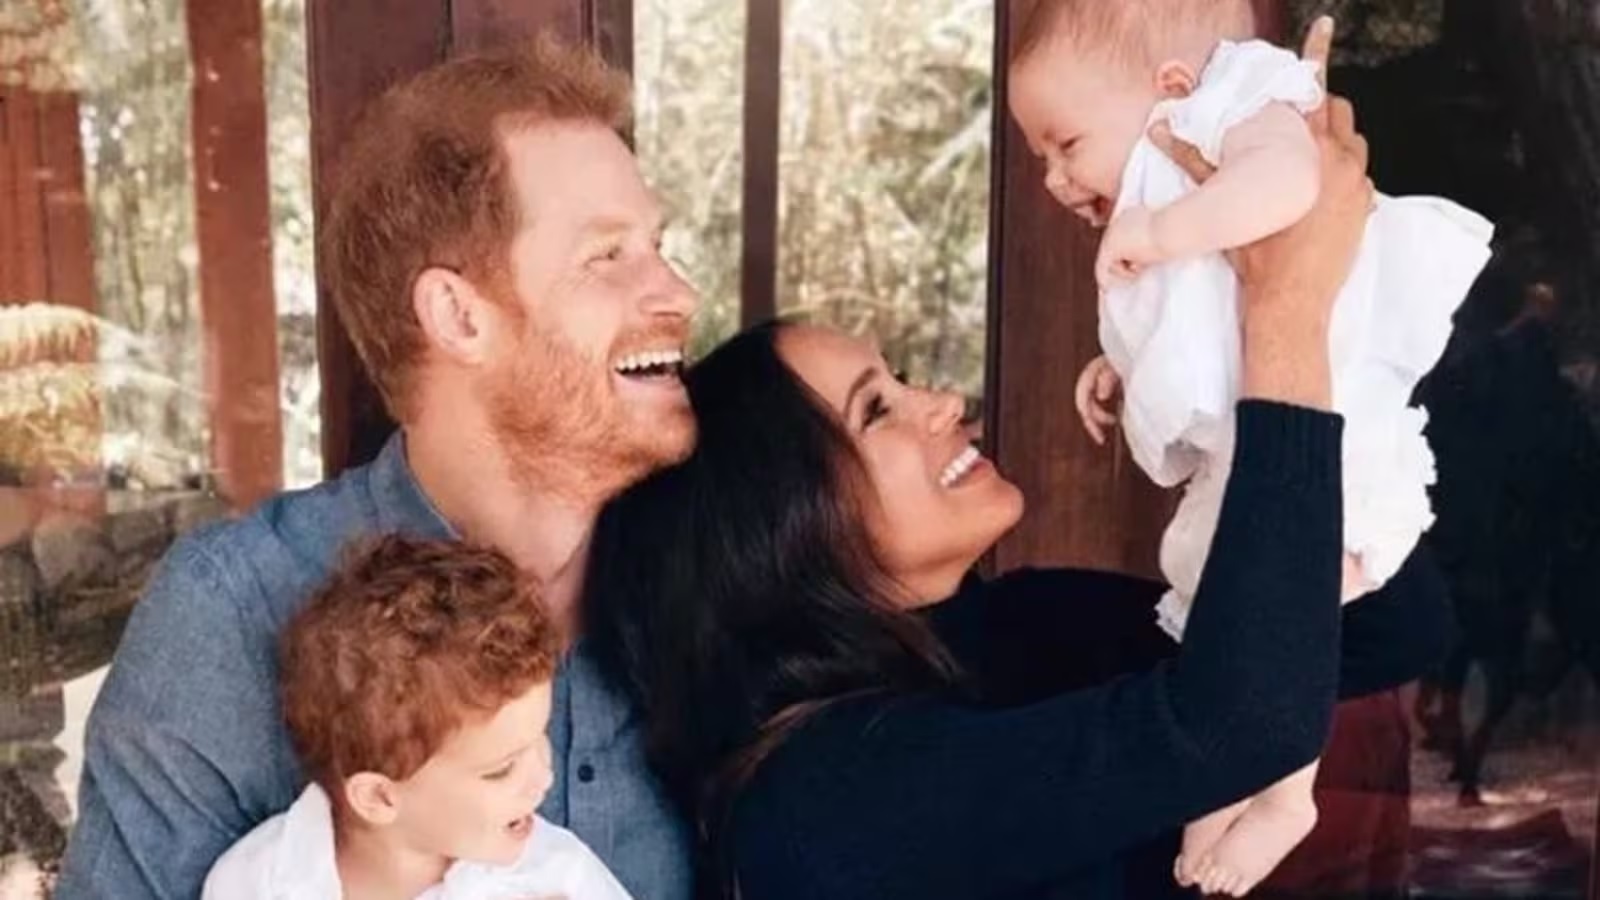 Harry and Meghan plan to include children Archie and Lilibet in future tours to boost their brand, as experts warn about unofficial royal-styled trips.